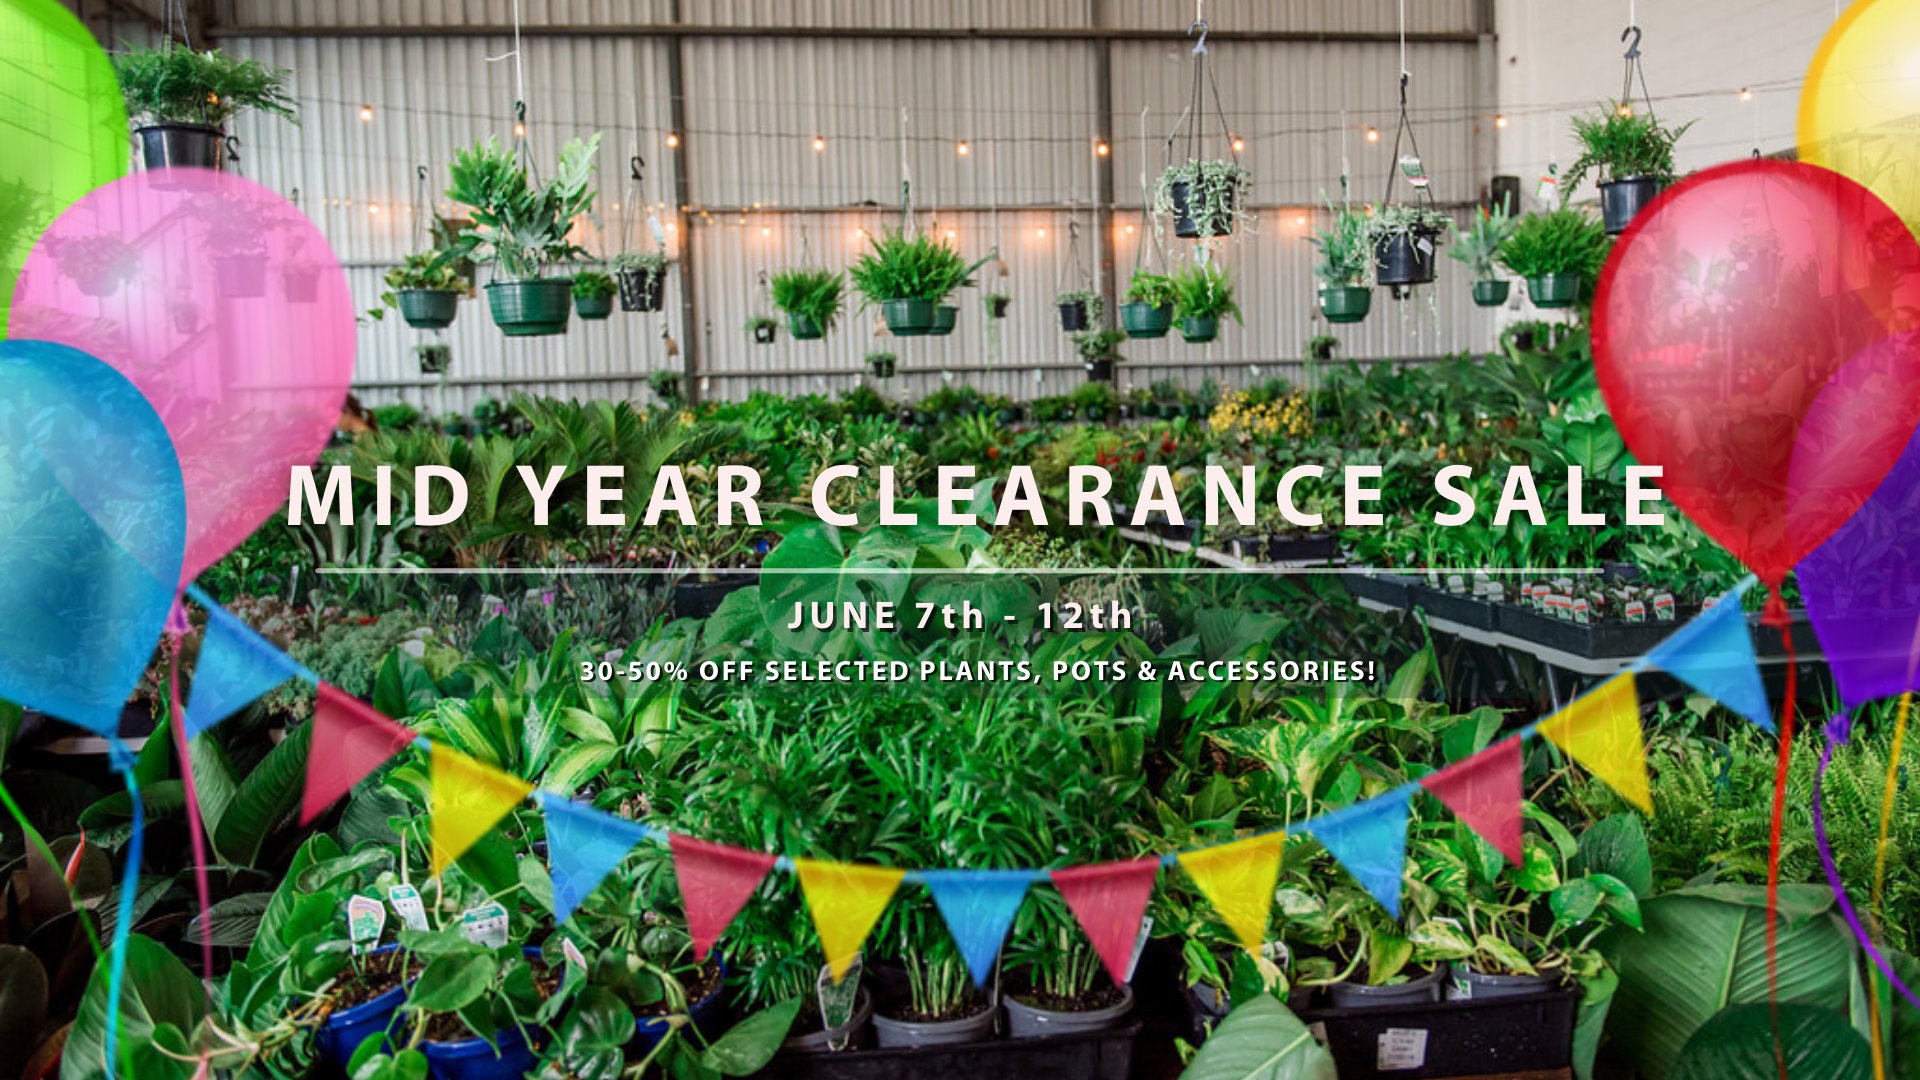 Sydney - Huge Indoor Plant Sale - Mid Year Clearance Sale!, Online Event